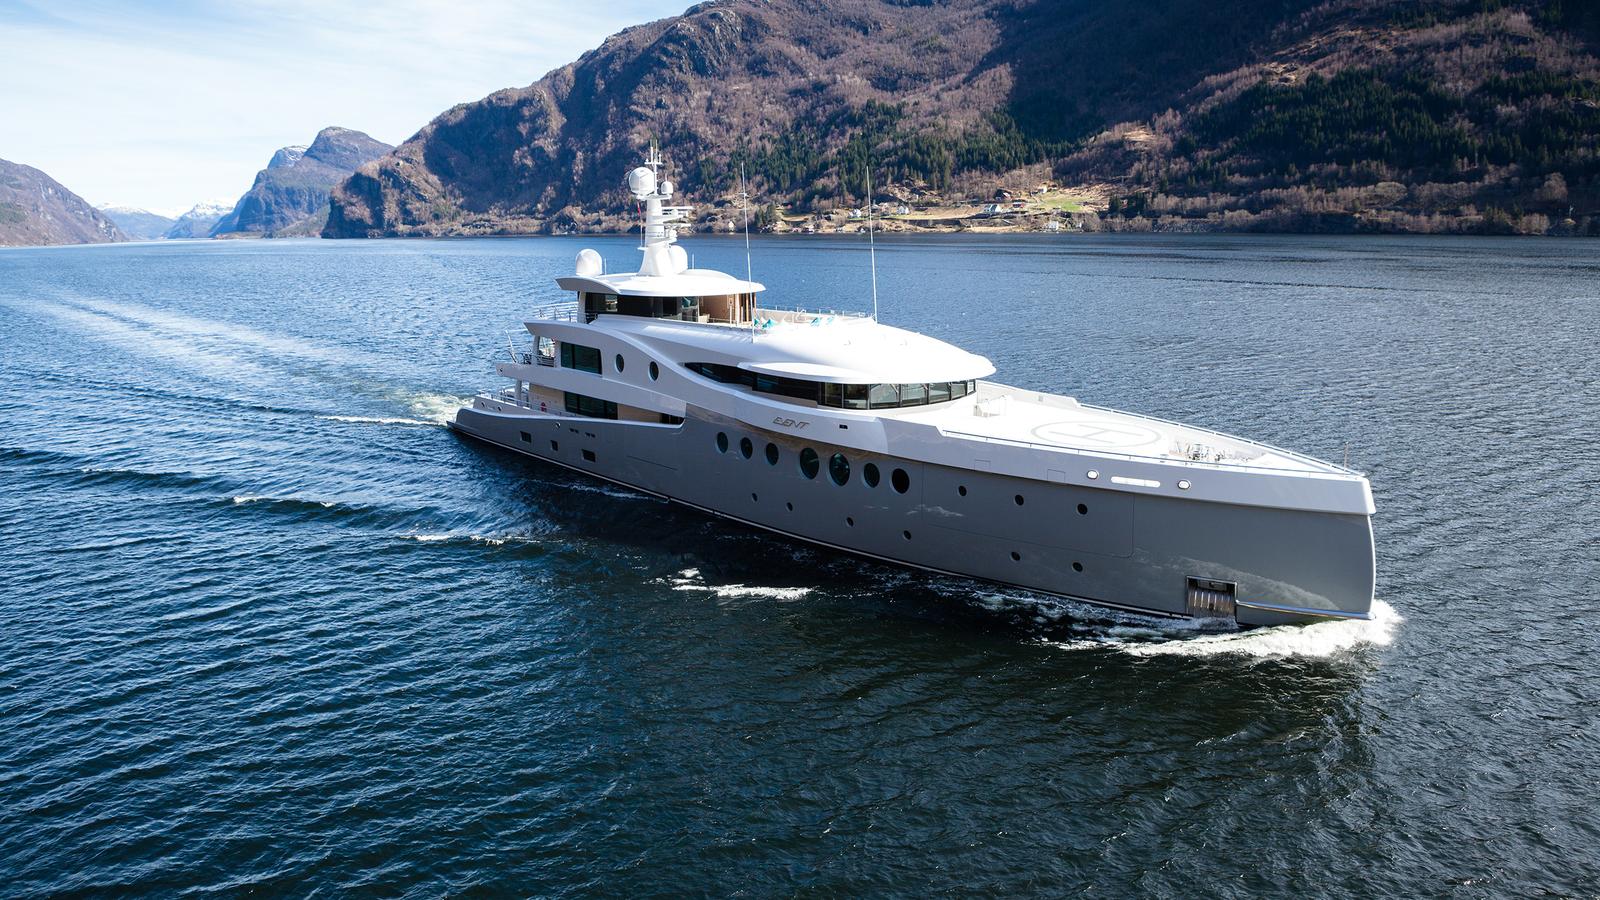 AMELS 199 Limited Edition Yacht - Underway In Norway